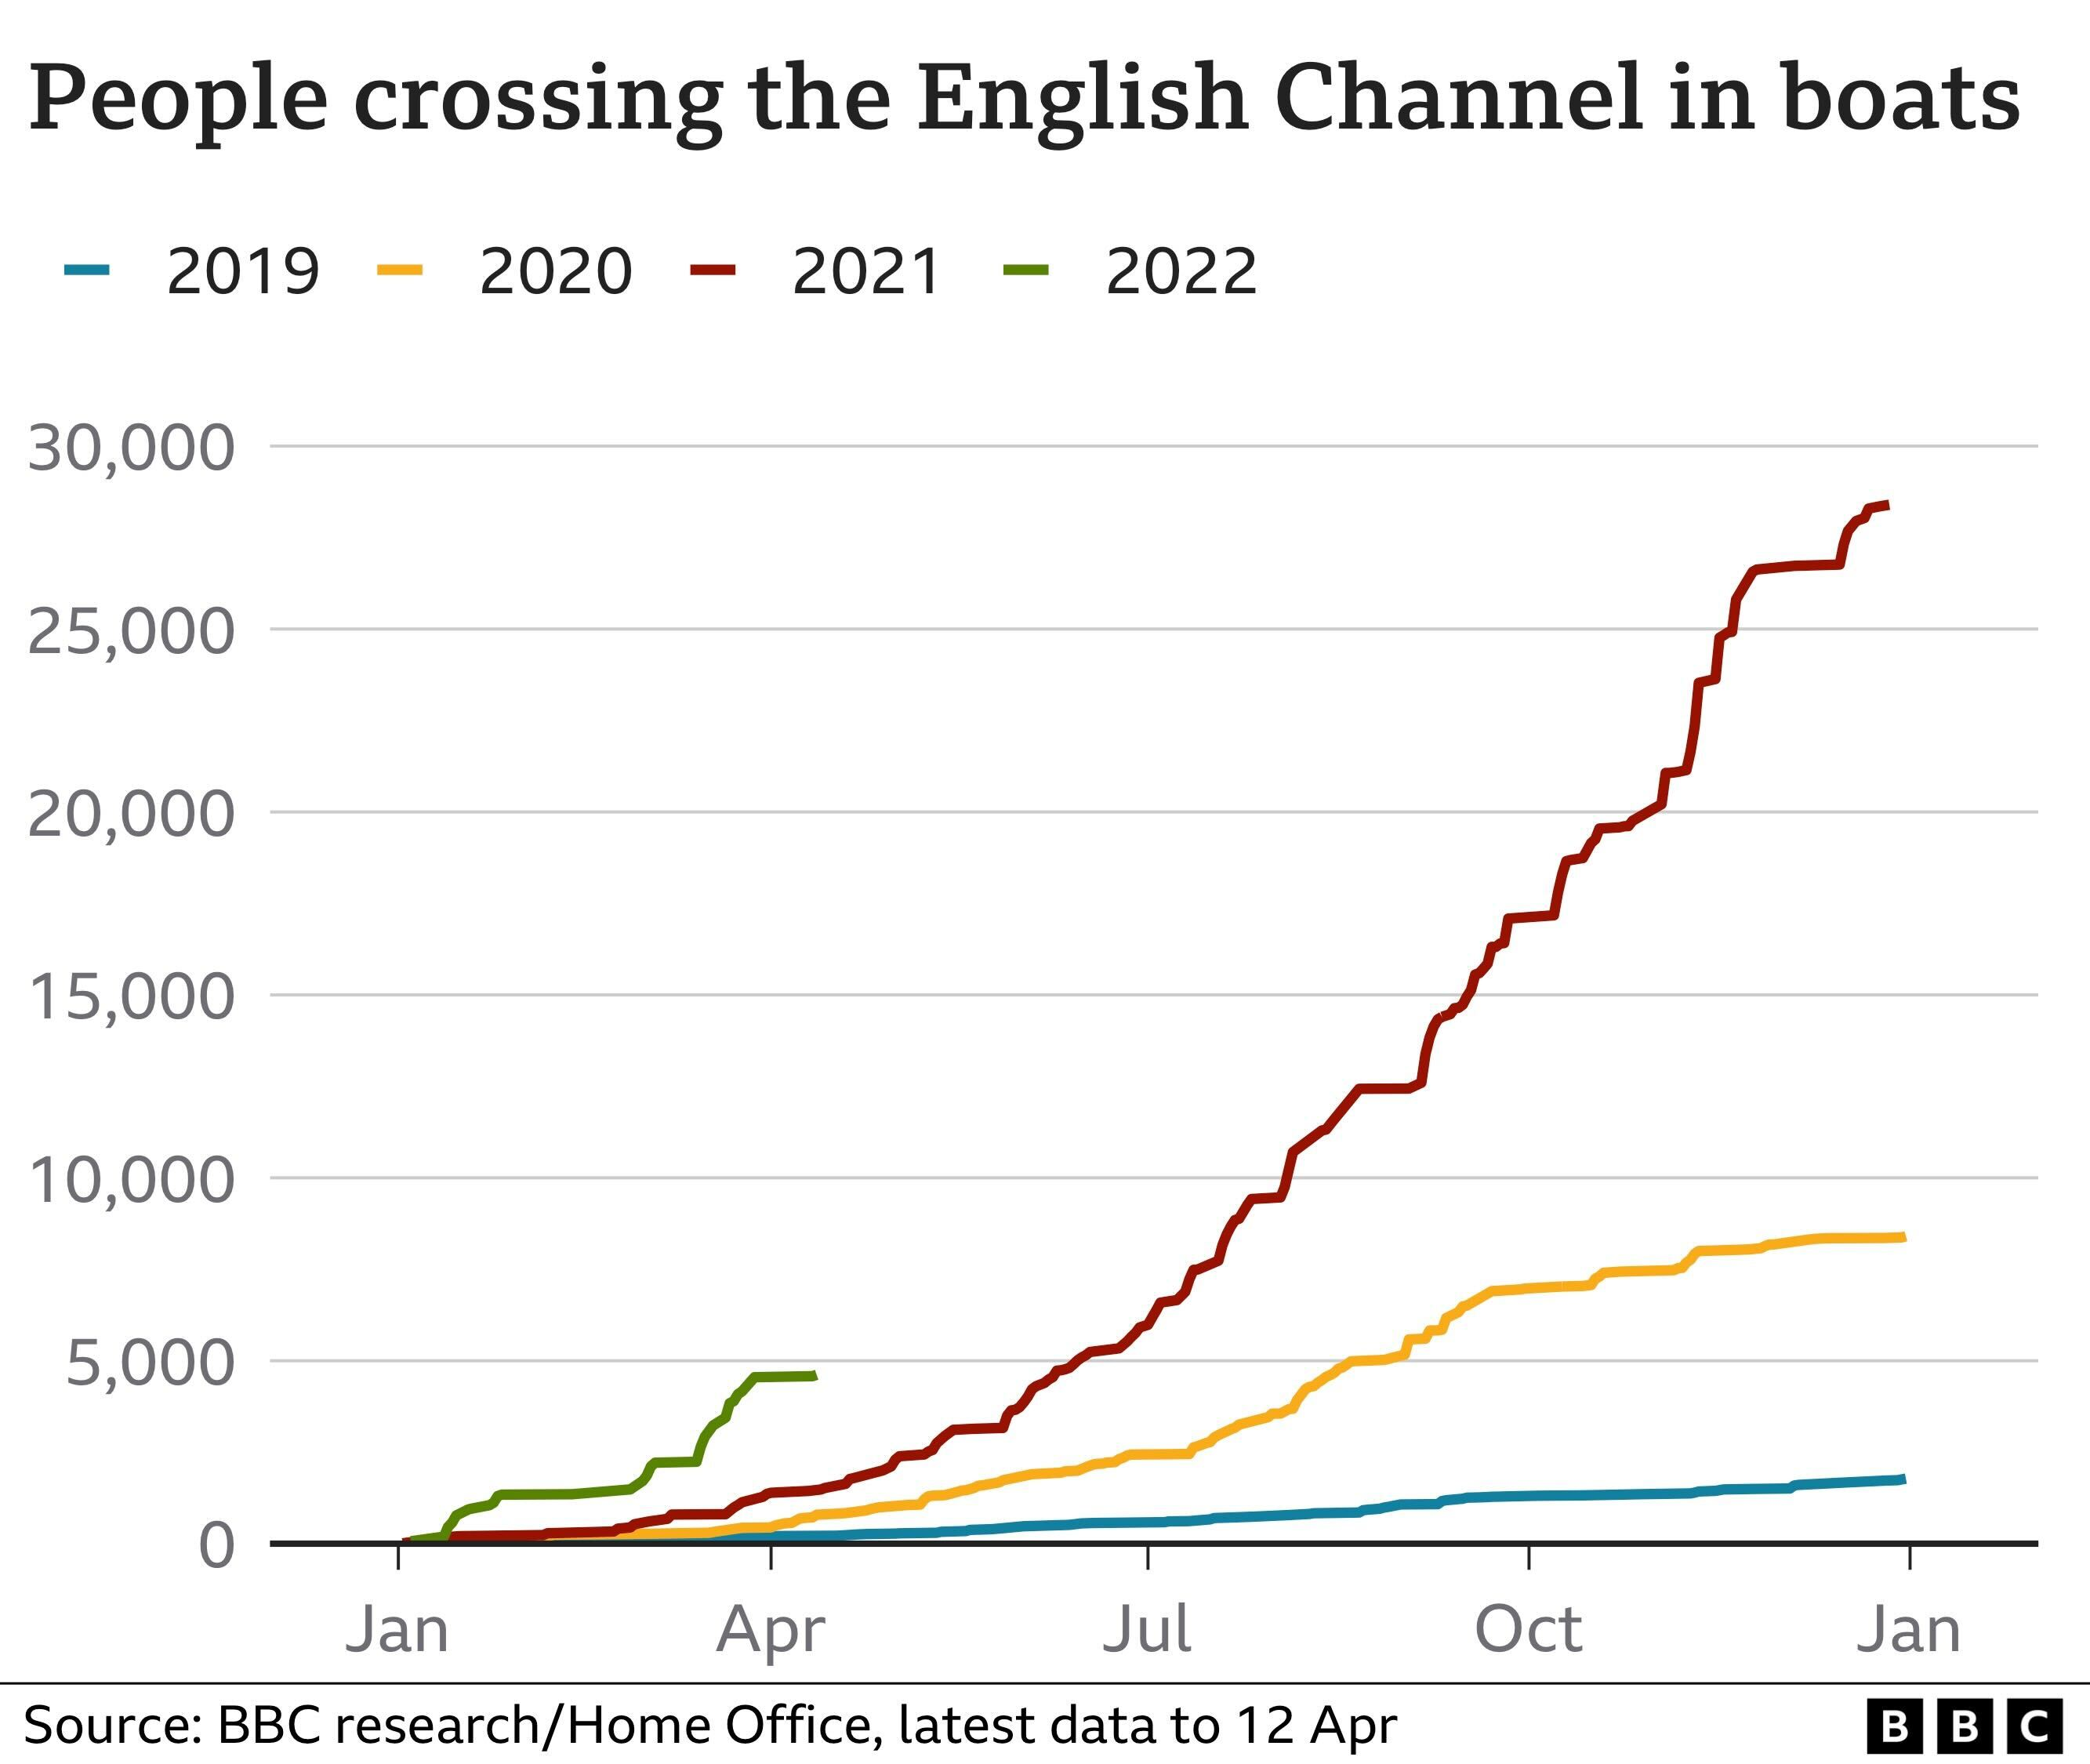 Chart showing the number of people crossing the English Channel between 2019 and 2022